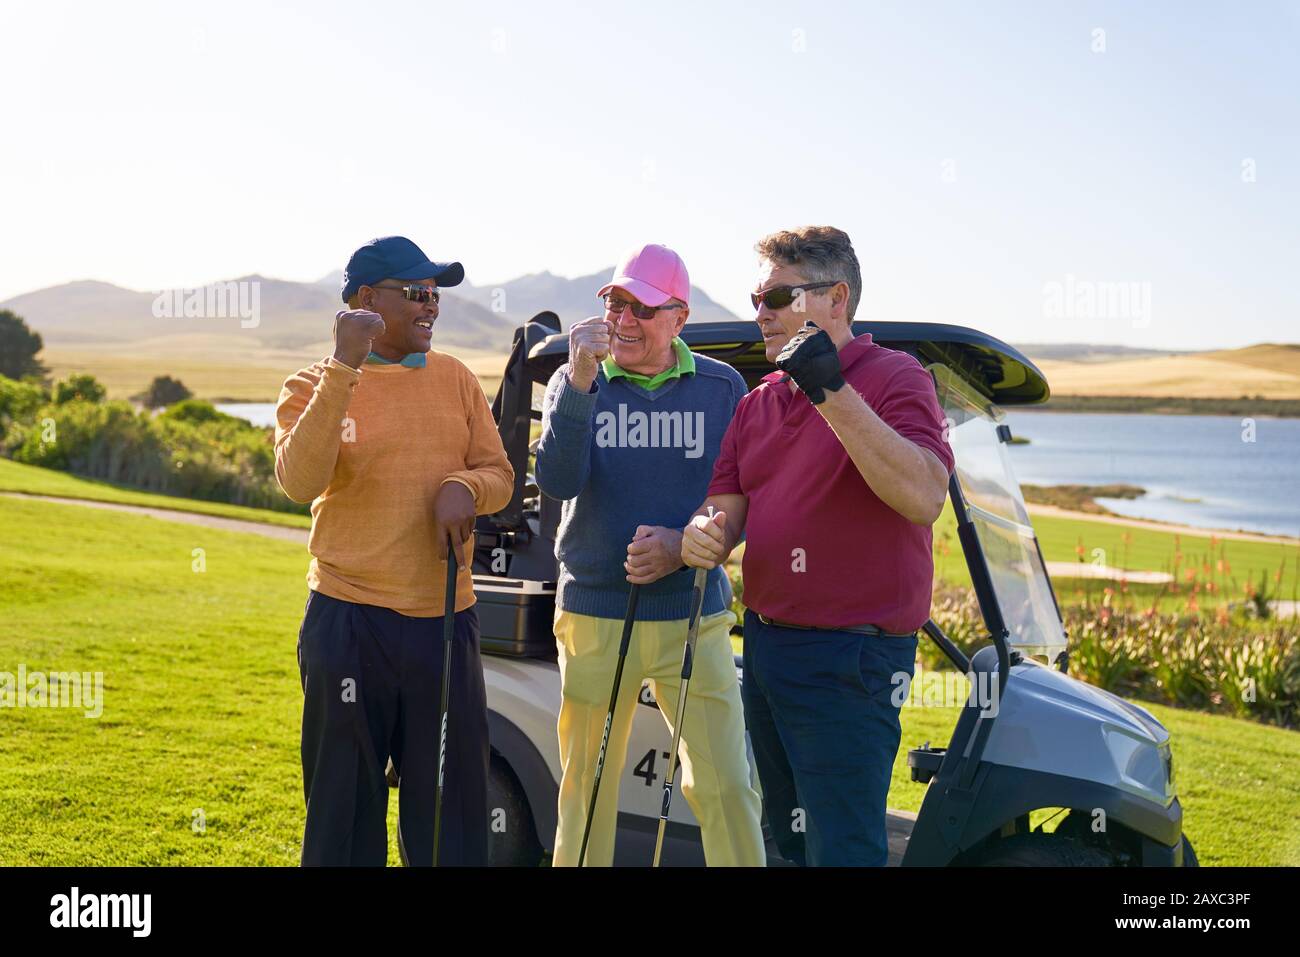 Male golfers cheering at sunny golf cart Stock Photo